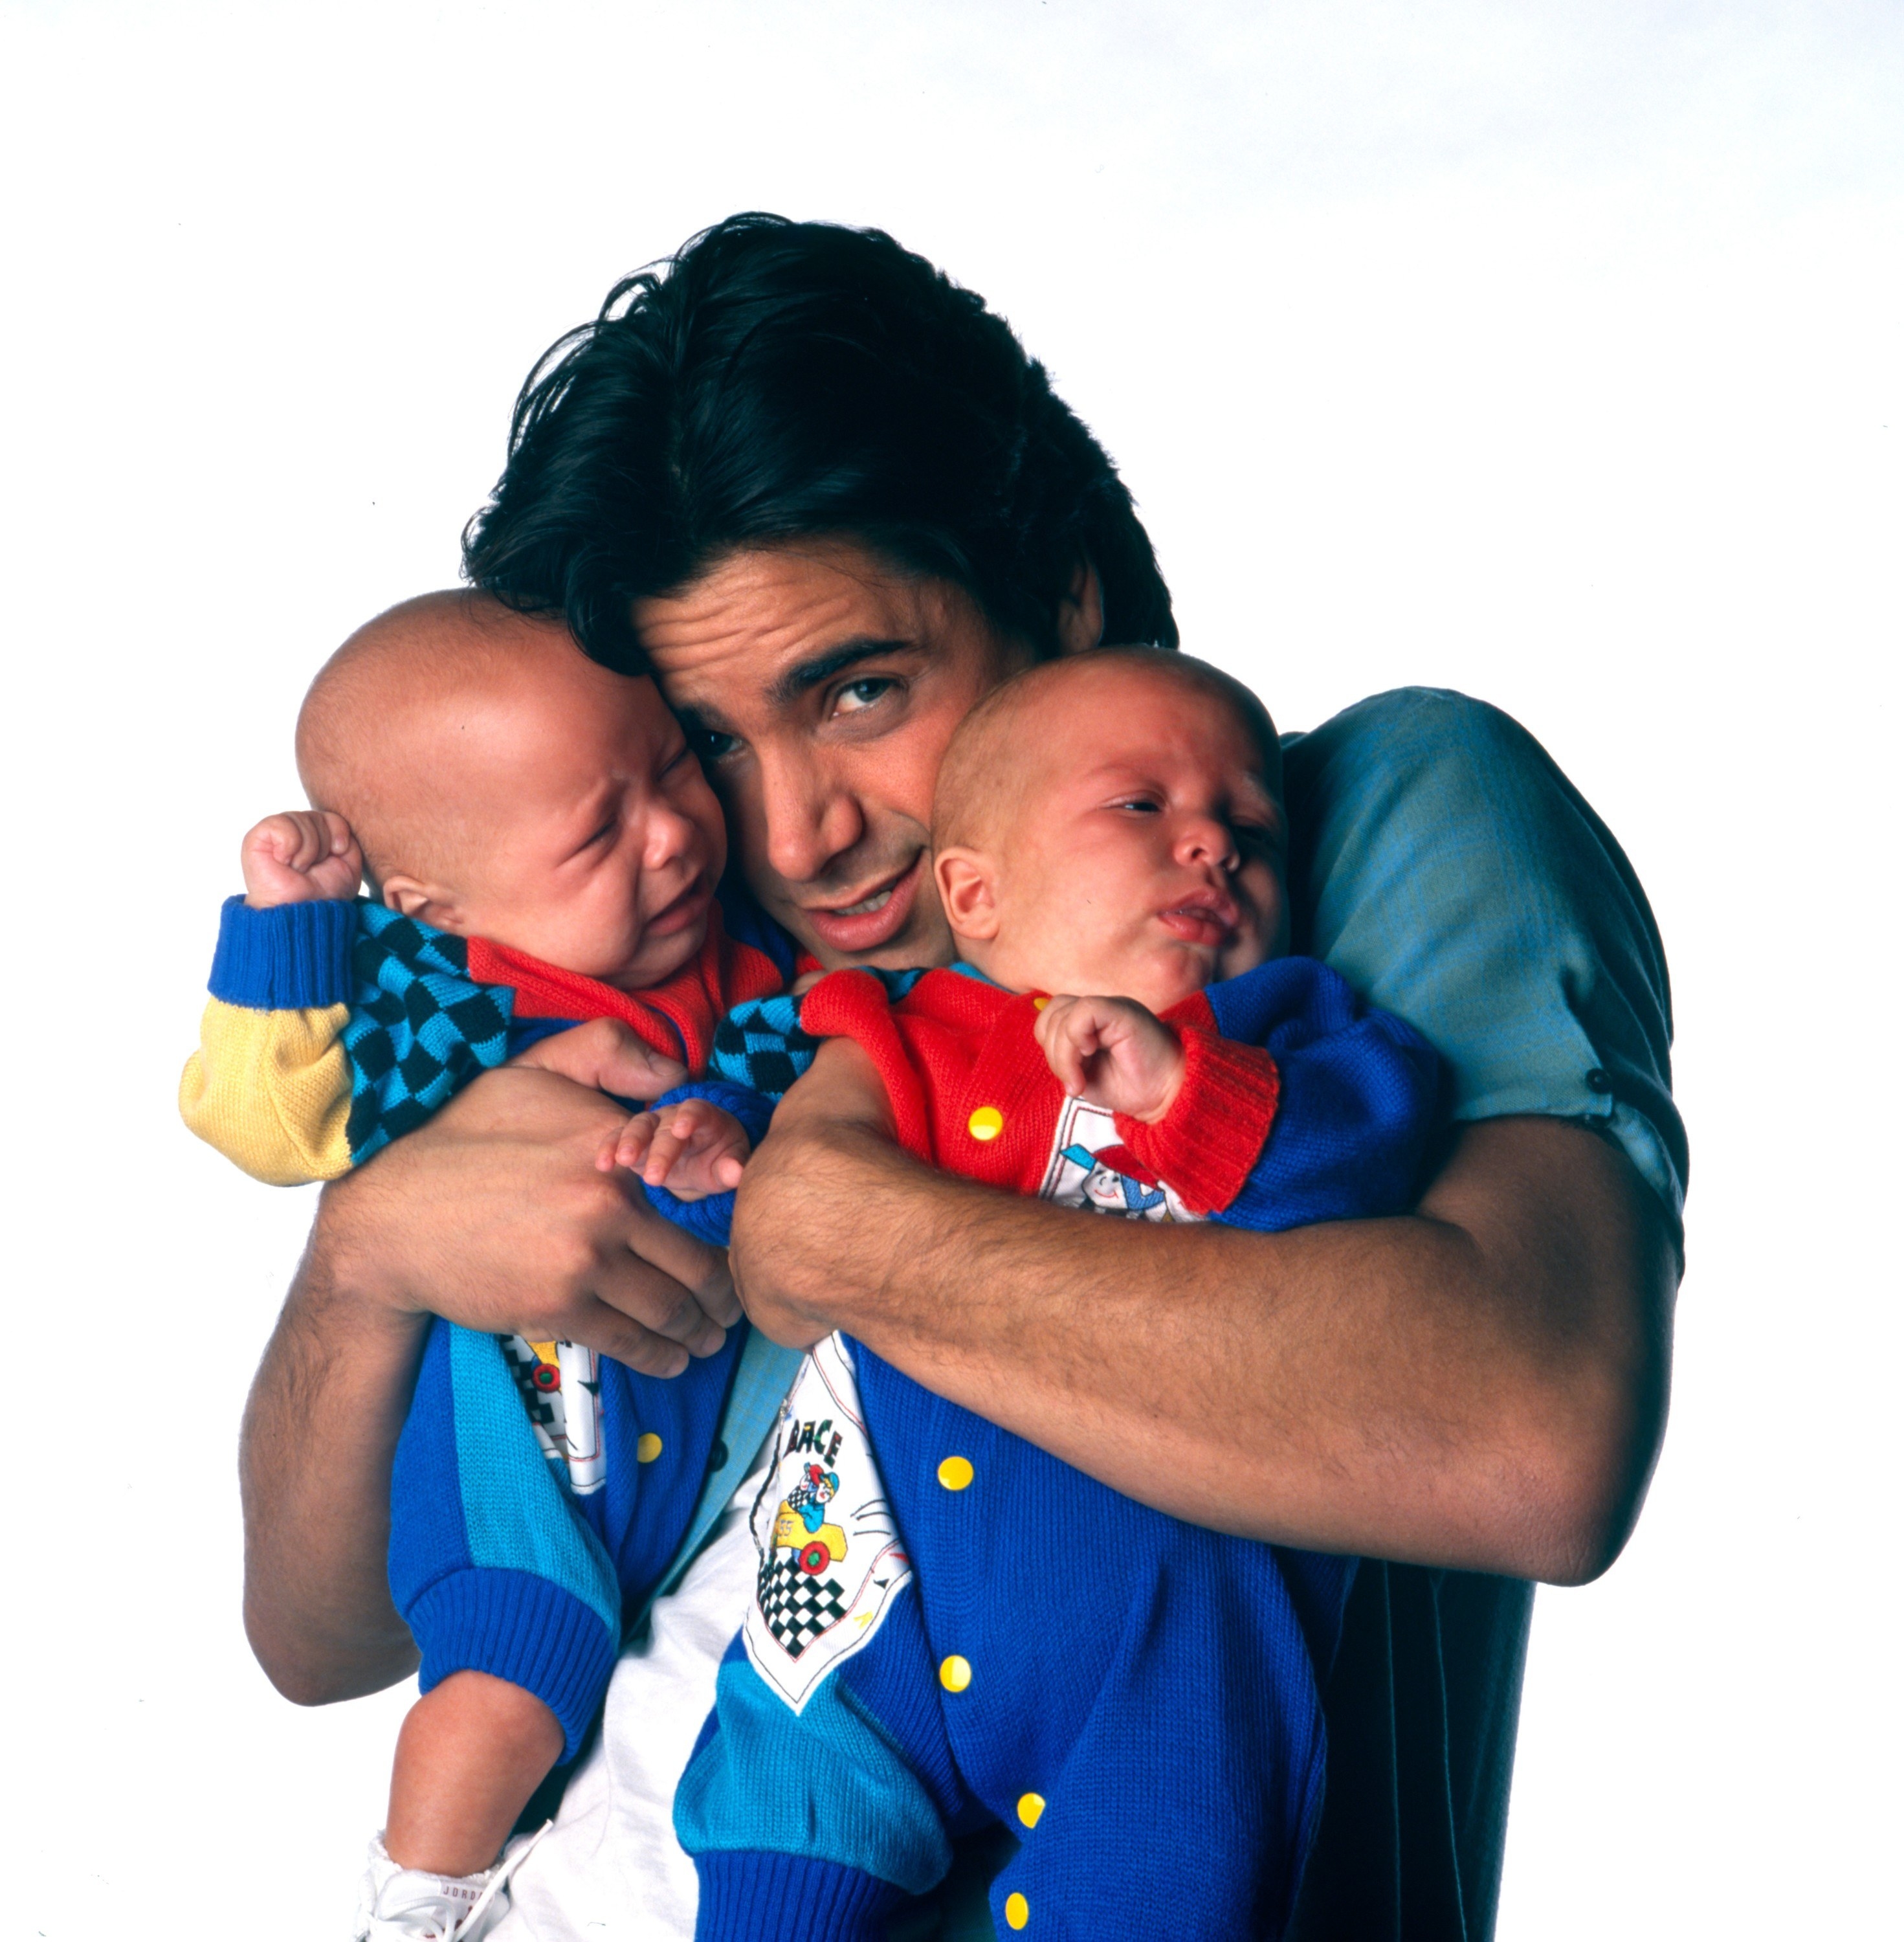 Ashley and her sister as babies being held by John Stamos